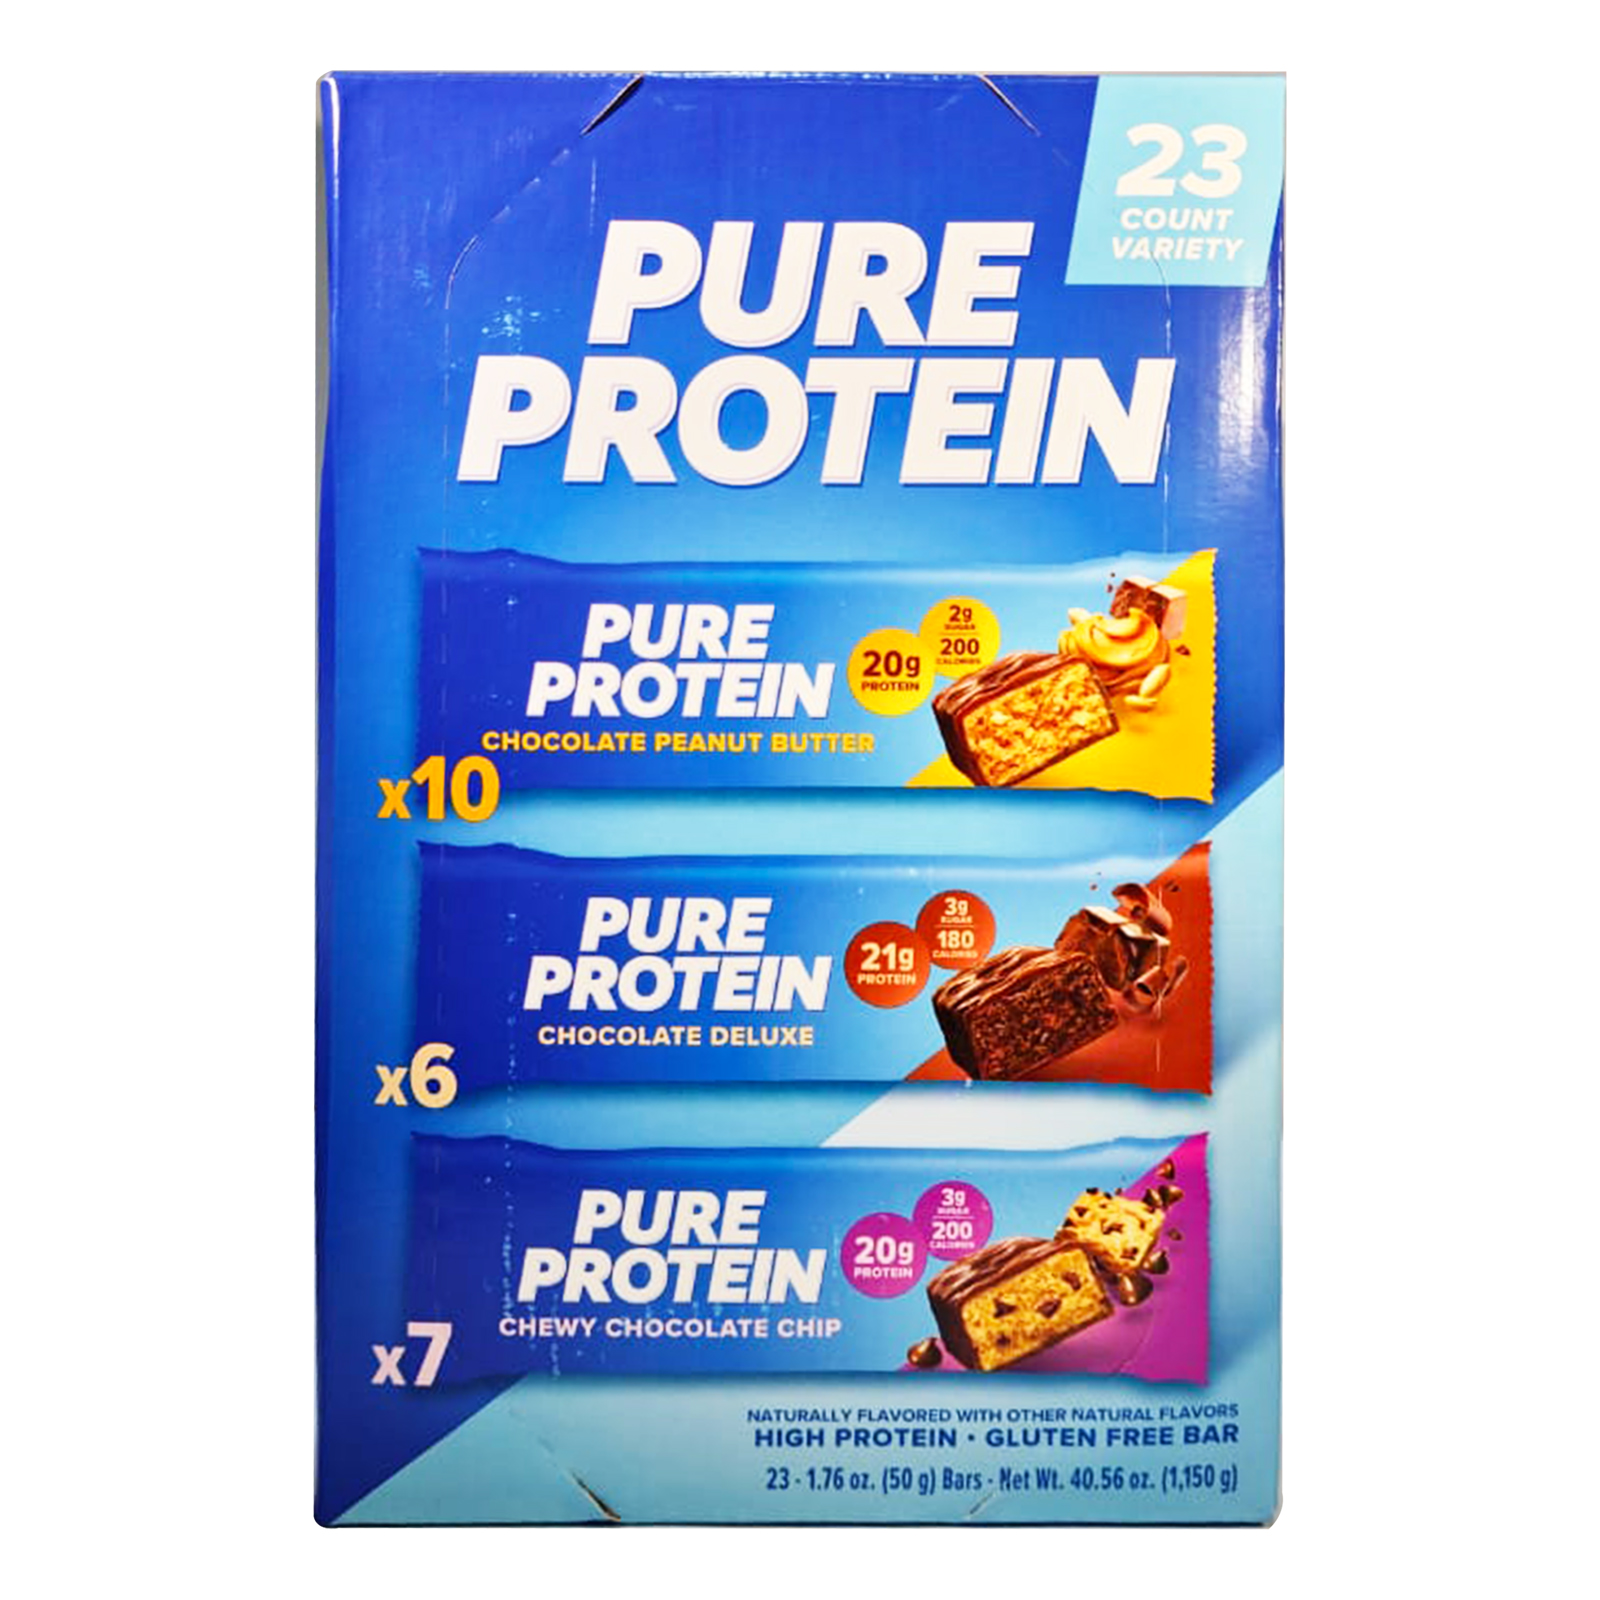 PROTEIN BARS VARIETY 23 PACKS ( CHOC PEANUT BUTTER - 10 , CHOC DELUX - 6, CHEWY CHOC CHIP - 7 ) PURE PROTEIN ( 1.15 KG )